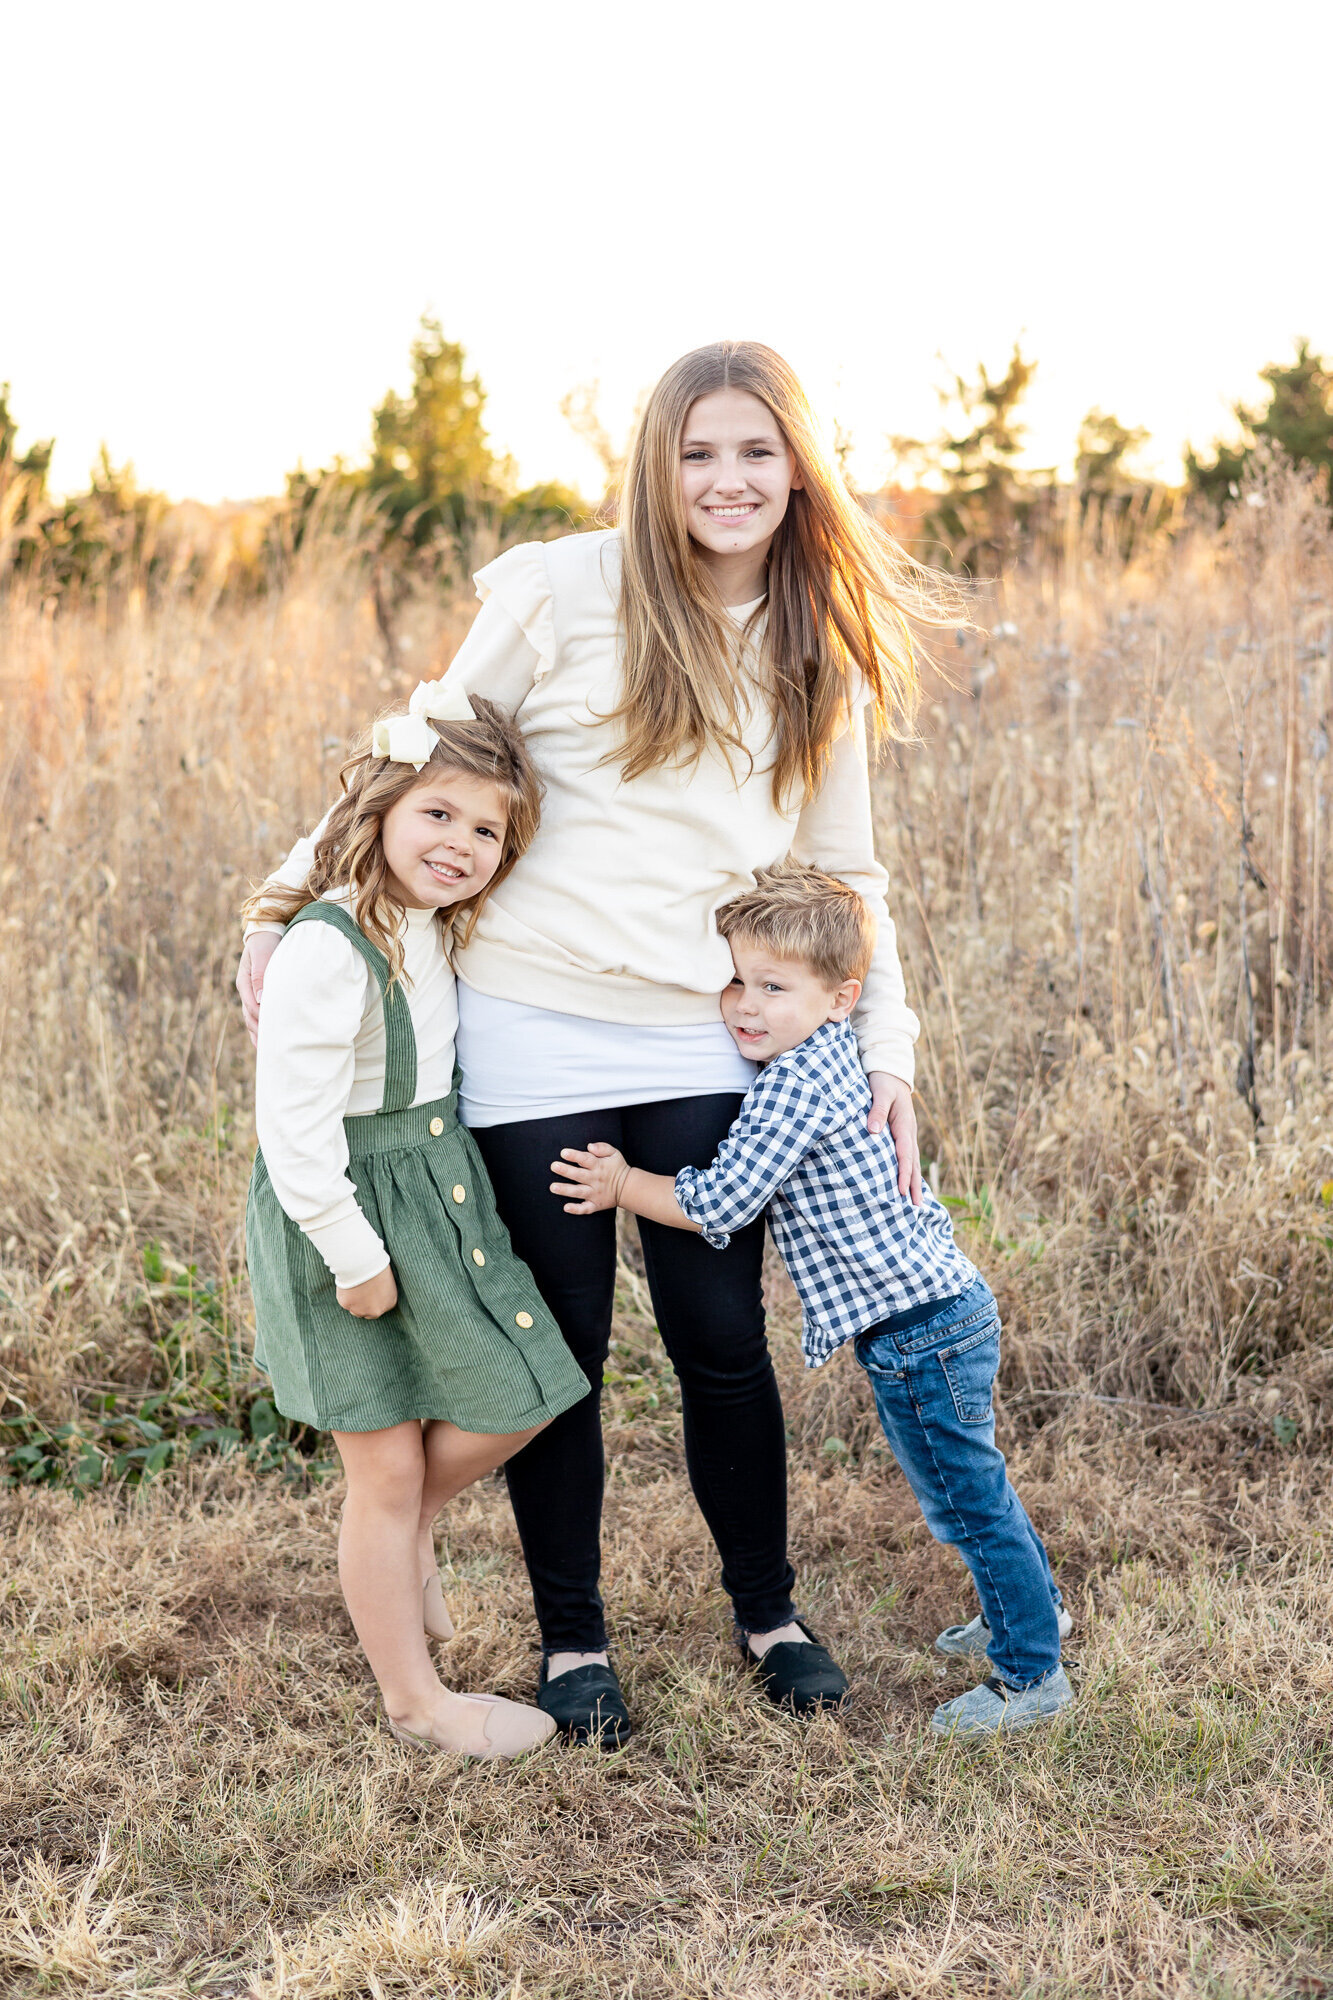 Outdoor-family-lifestyle-photography-session-Frankfort-KY-photographer-golden-hour-3